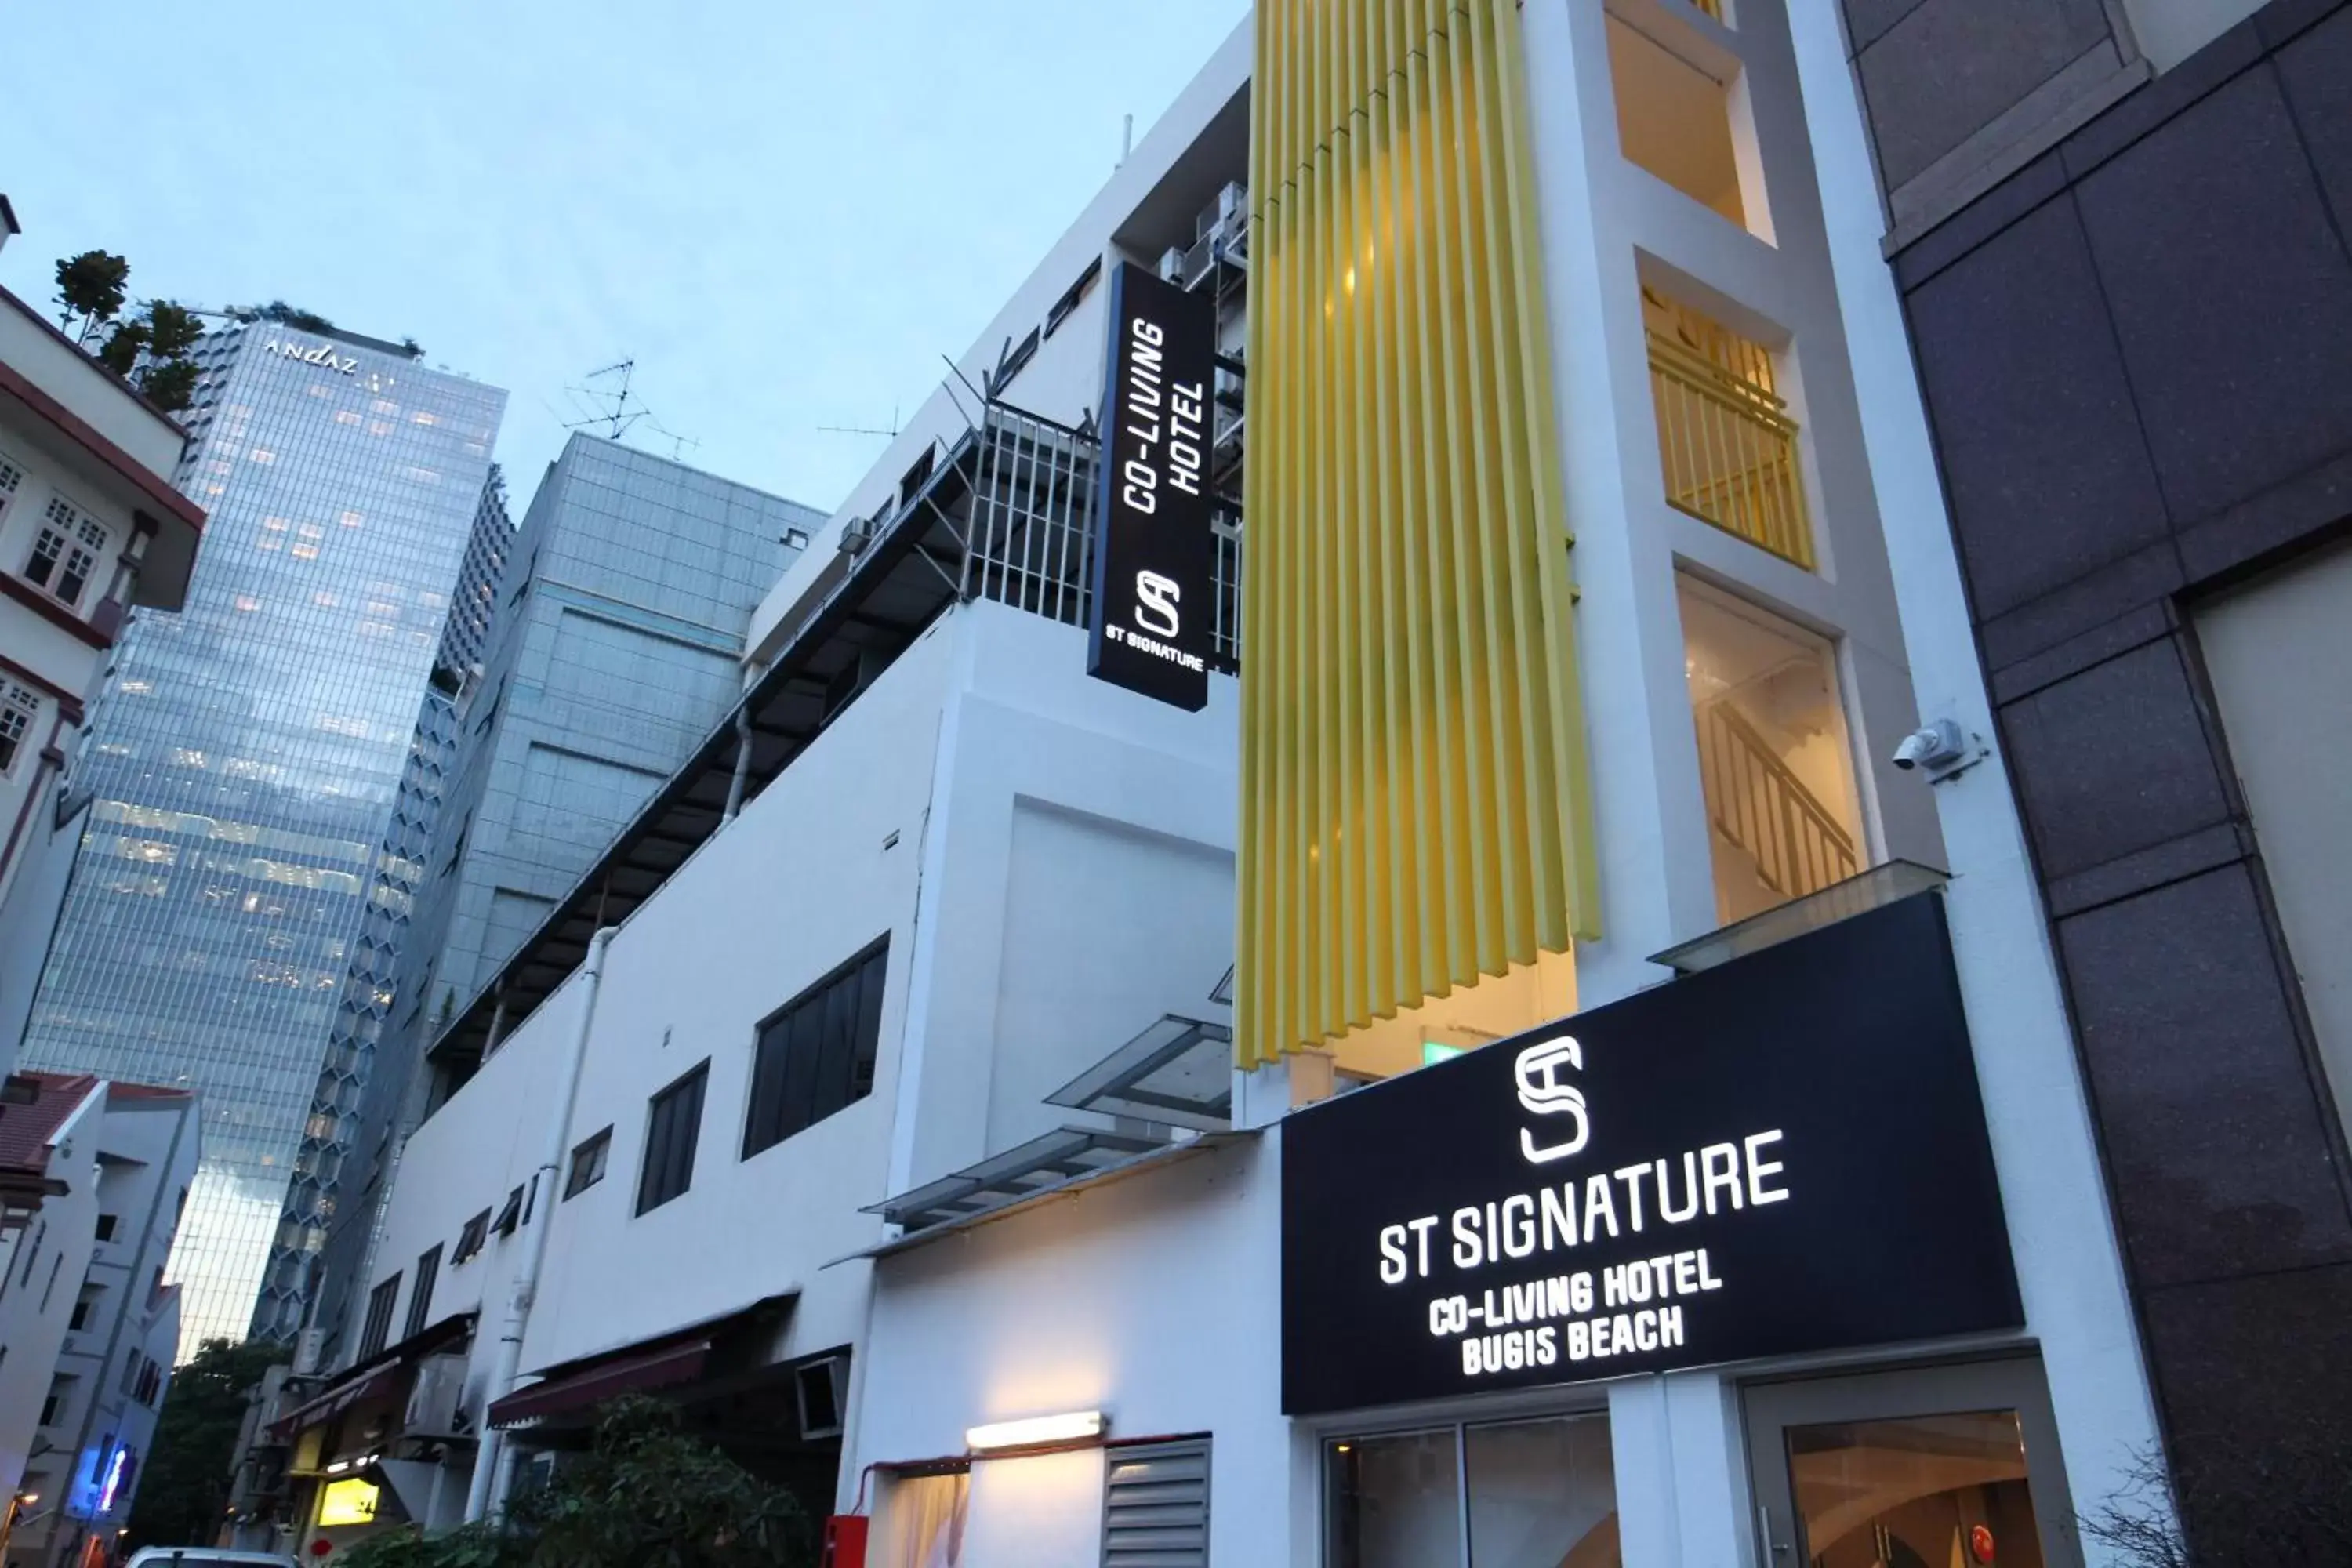 Property Building in ST Signature Bugis Beach, DAYUSE, 8-9 Hours, check in 8AM or 11AM